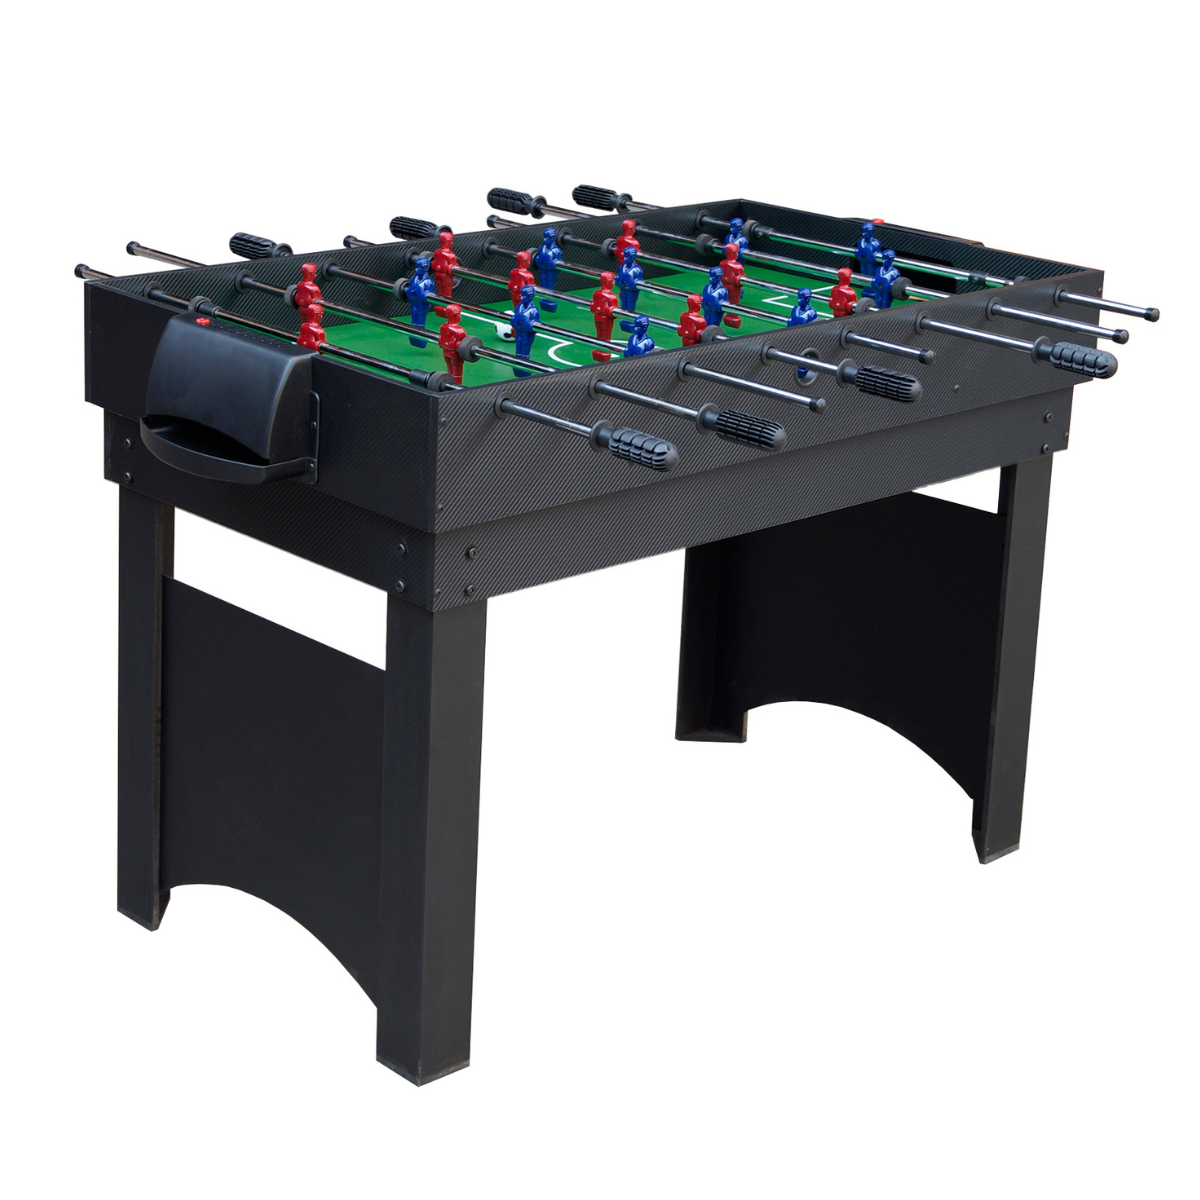 The Jupiter 4ft 4-in-1 Pool Table